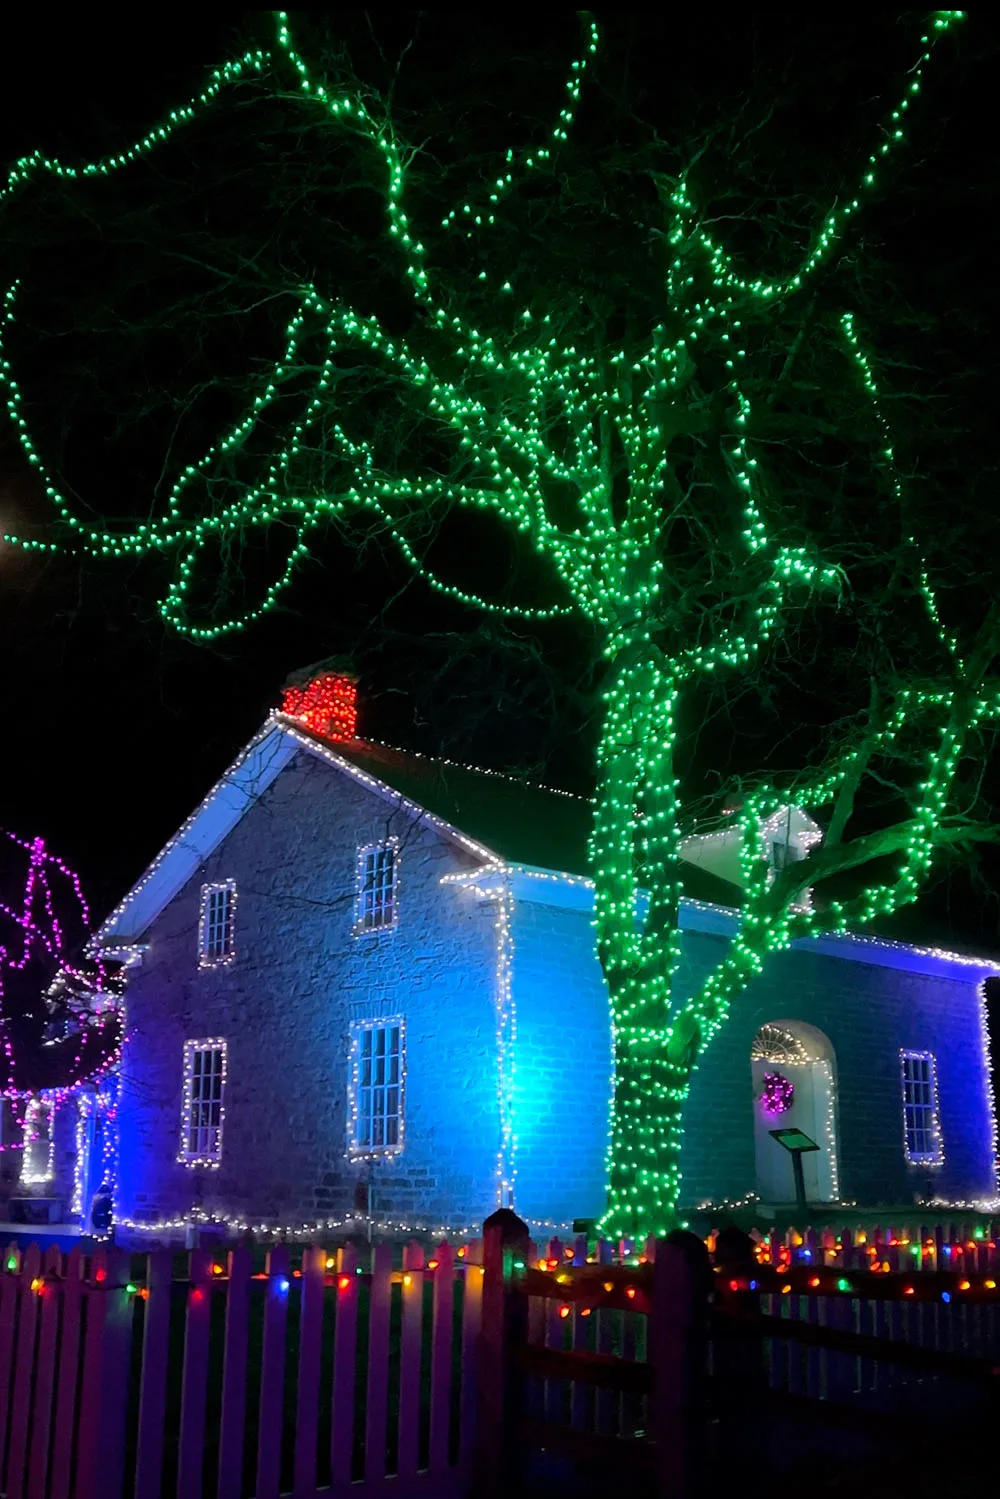 Ever wish you could step into a Hallmark Christmas movie? These 13 magical Christmas towns in Ontario will have you feeling just like you did! Pack your bags, load up the car, and get ready for the ultimate Christmas getaway - a road trip through Ontario's Christmas towns! Pictured here: Morrisburg